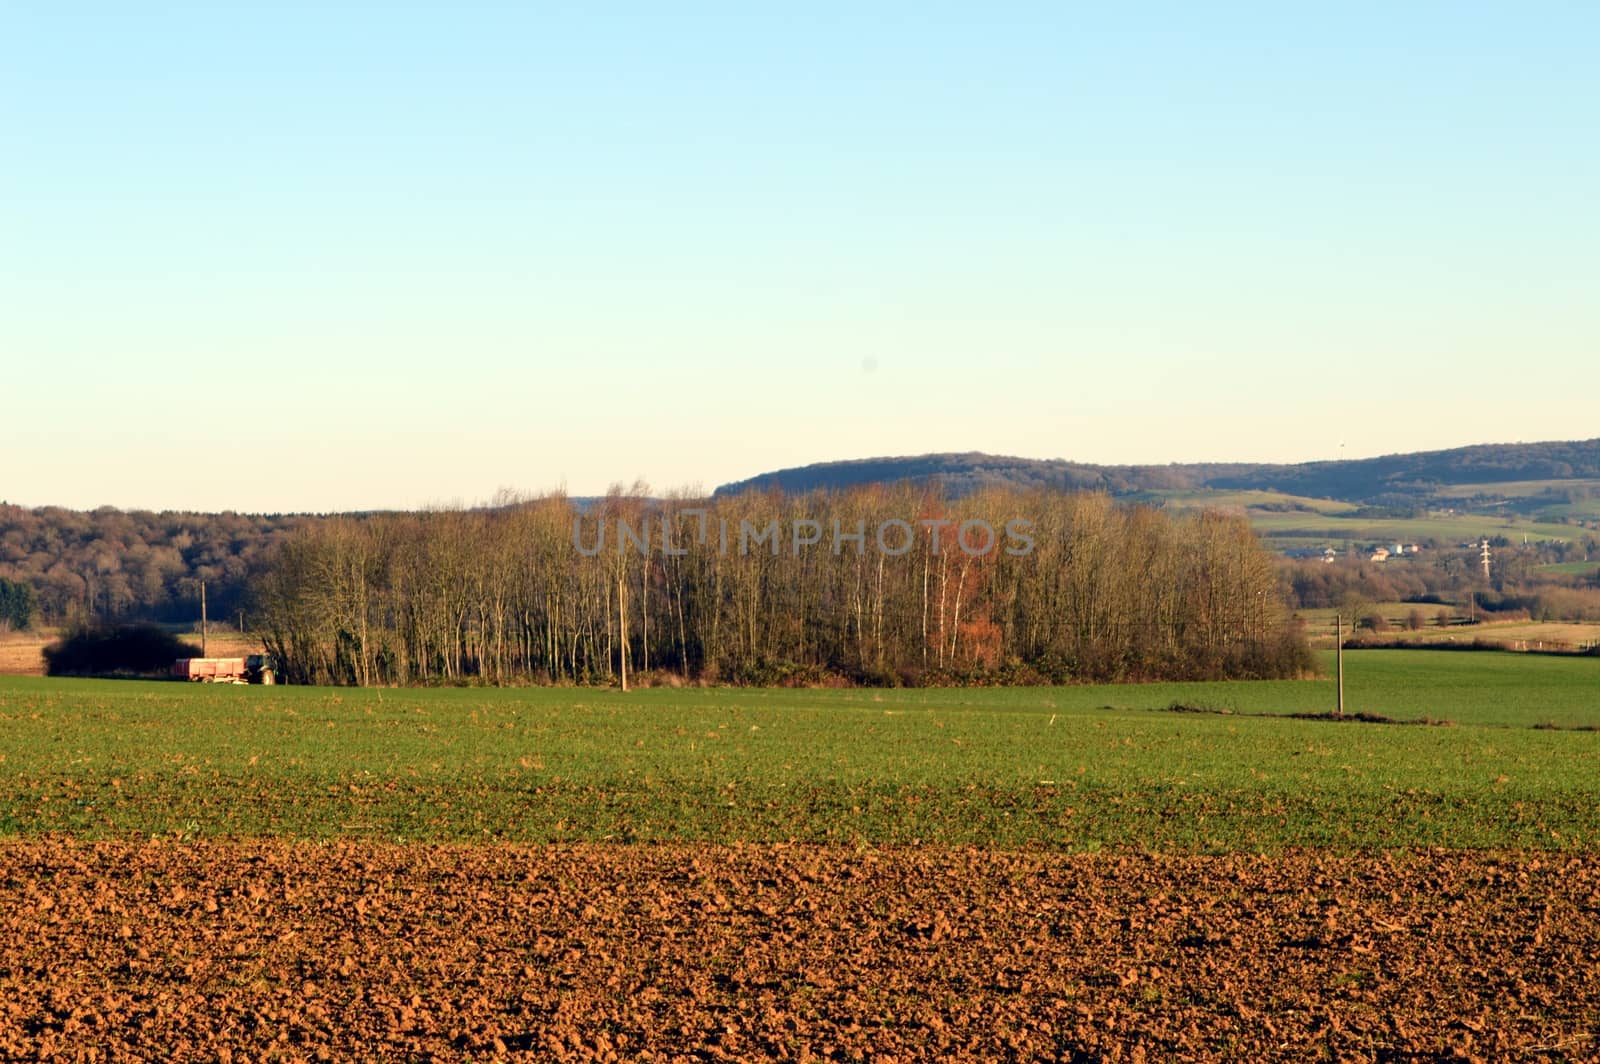 Plowed field and young thumb with a grove  by Philou1000